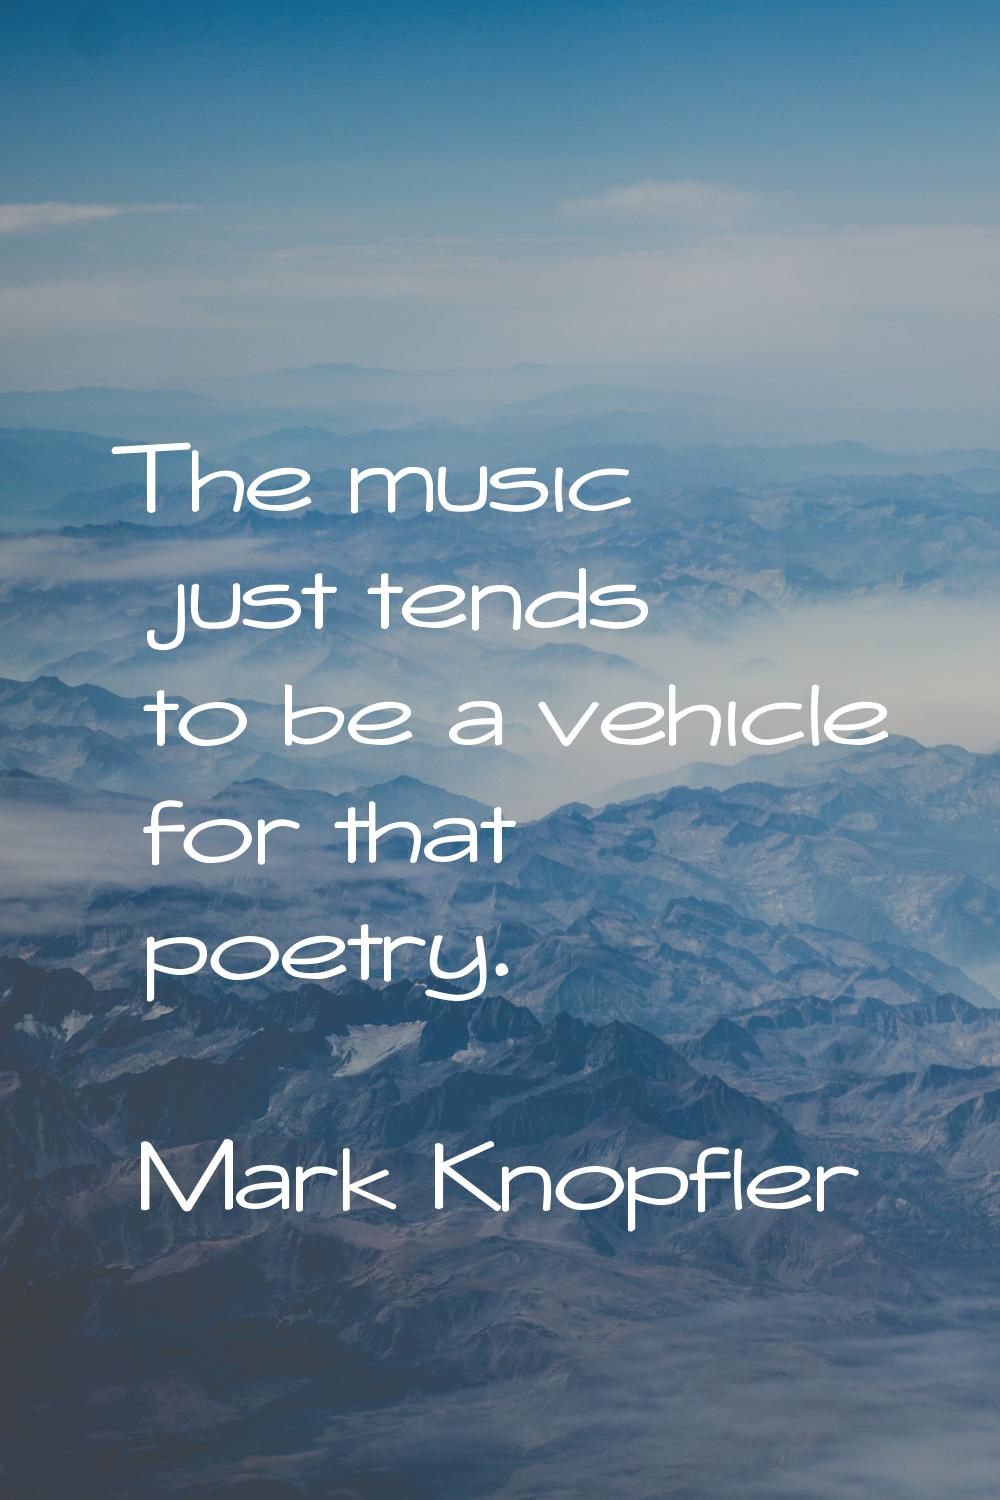 The music just tends to be a vehicle for that poetry.